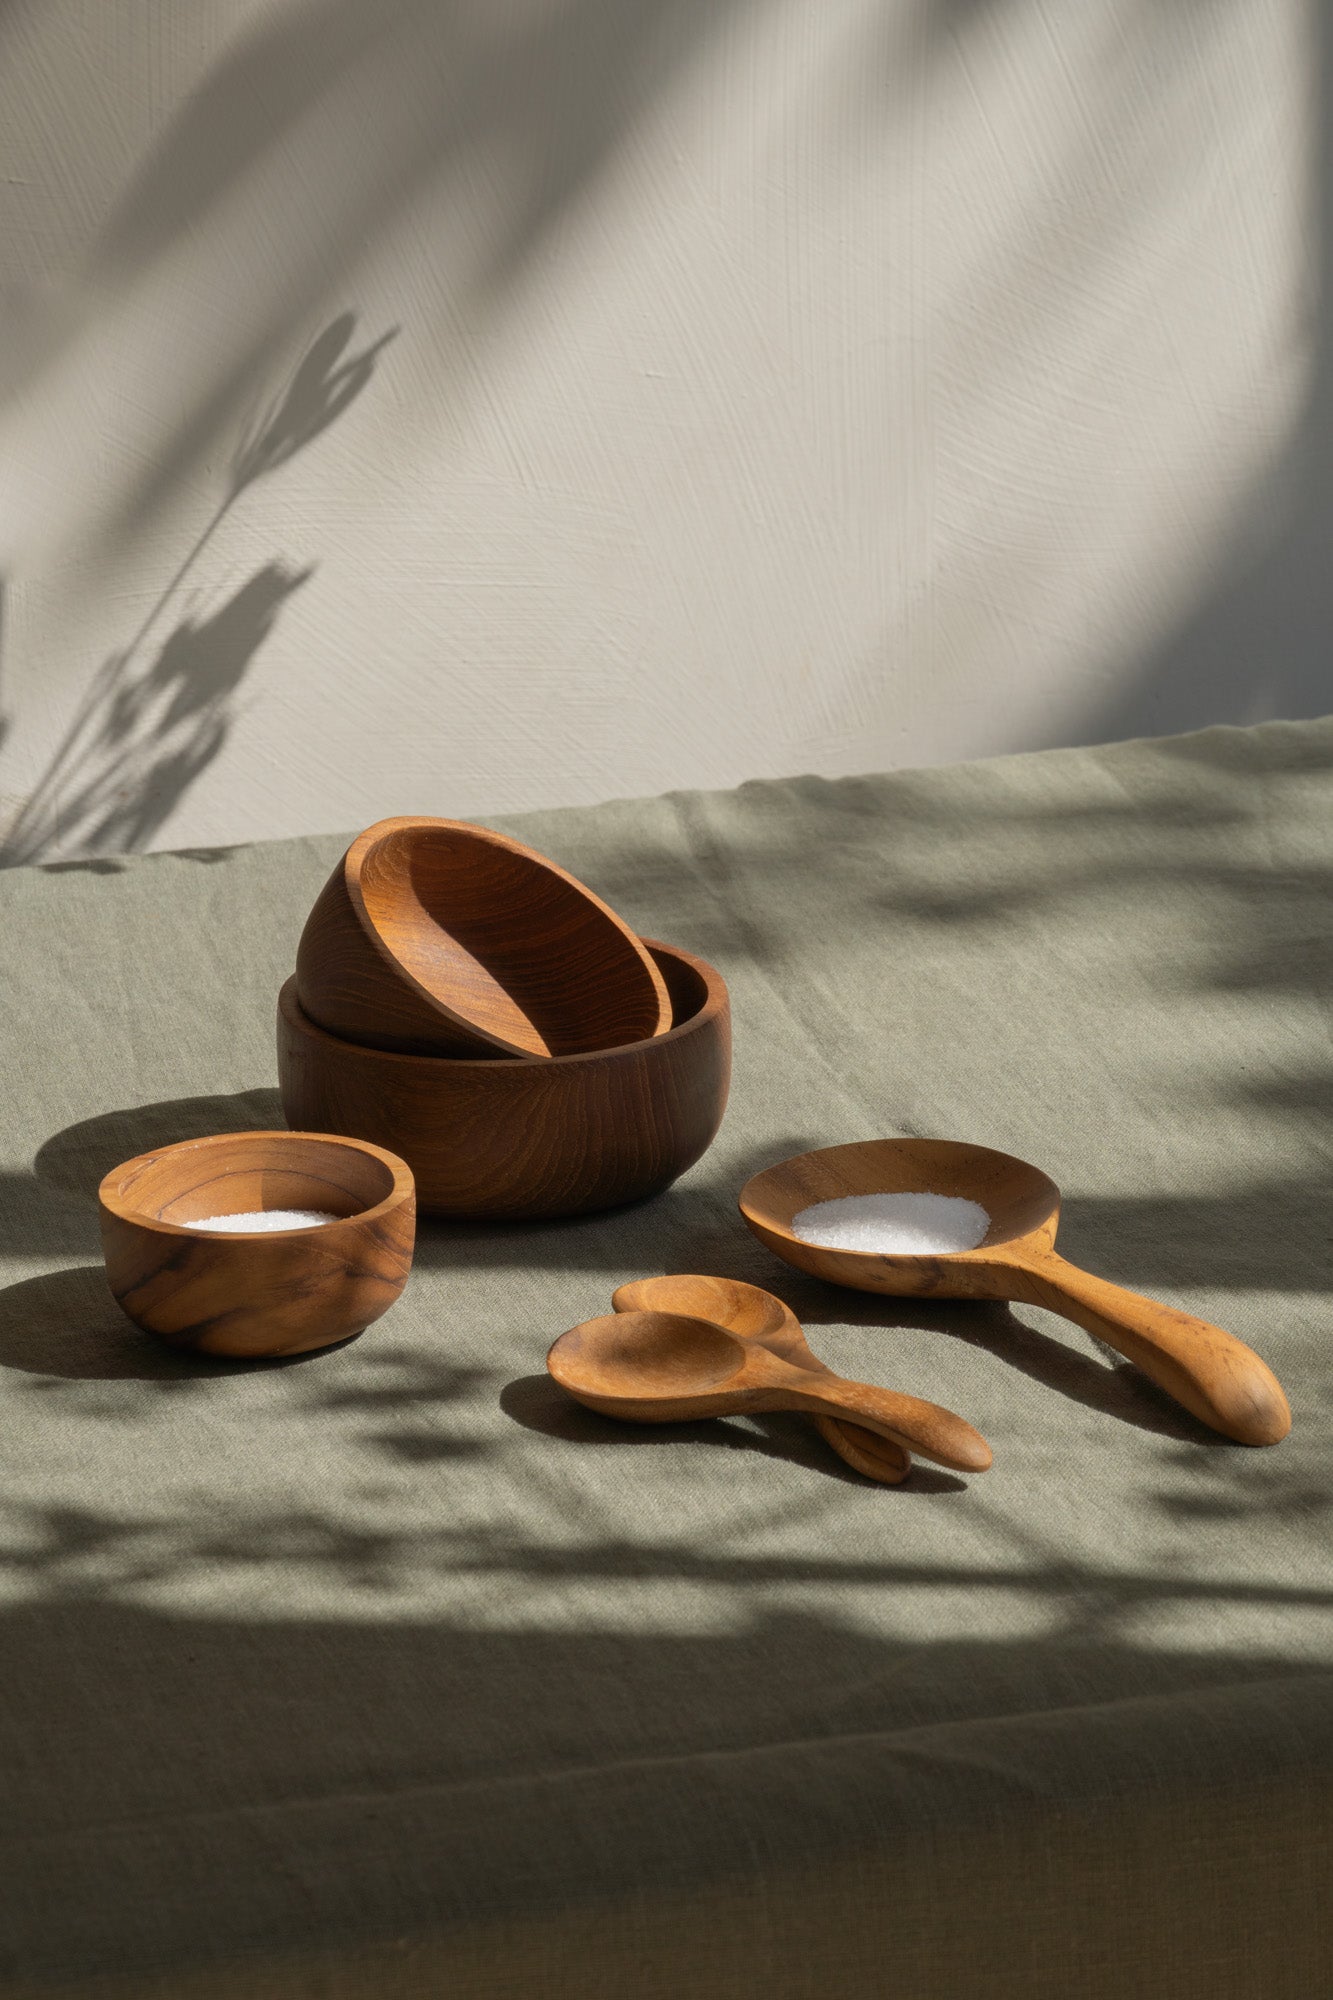 Nibble Wooden Bowls and Spoons by The Loft Selects.